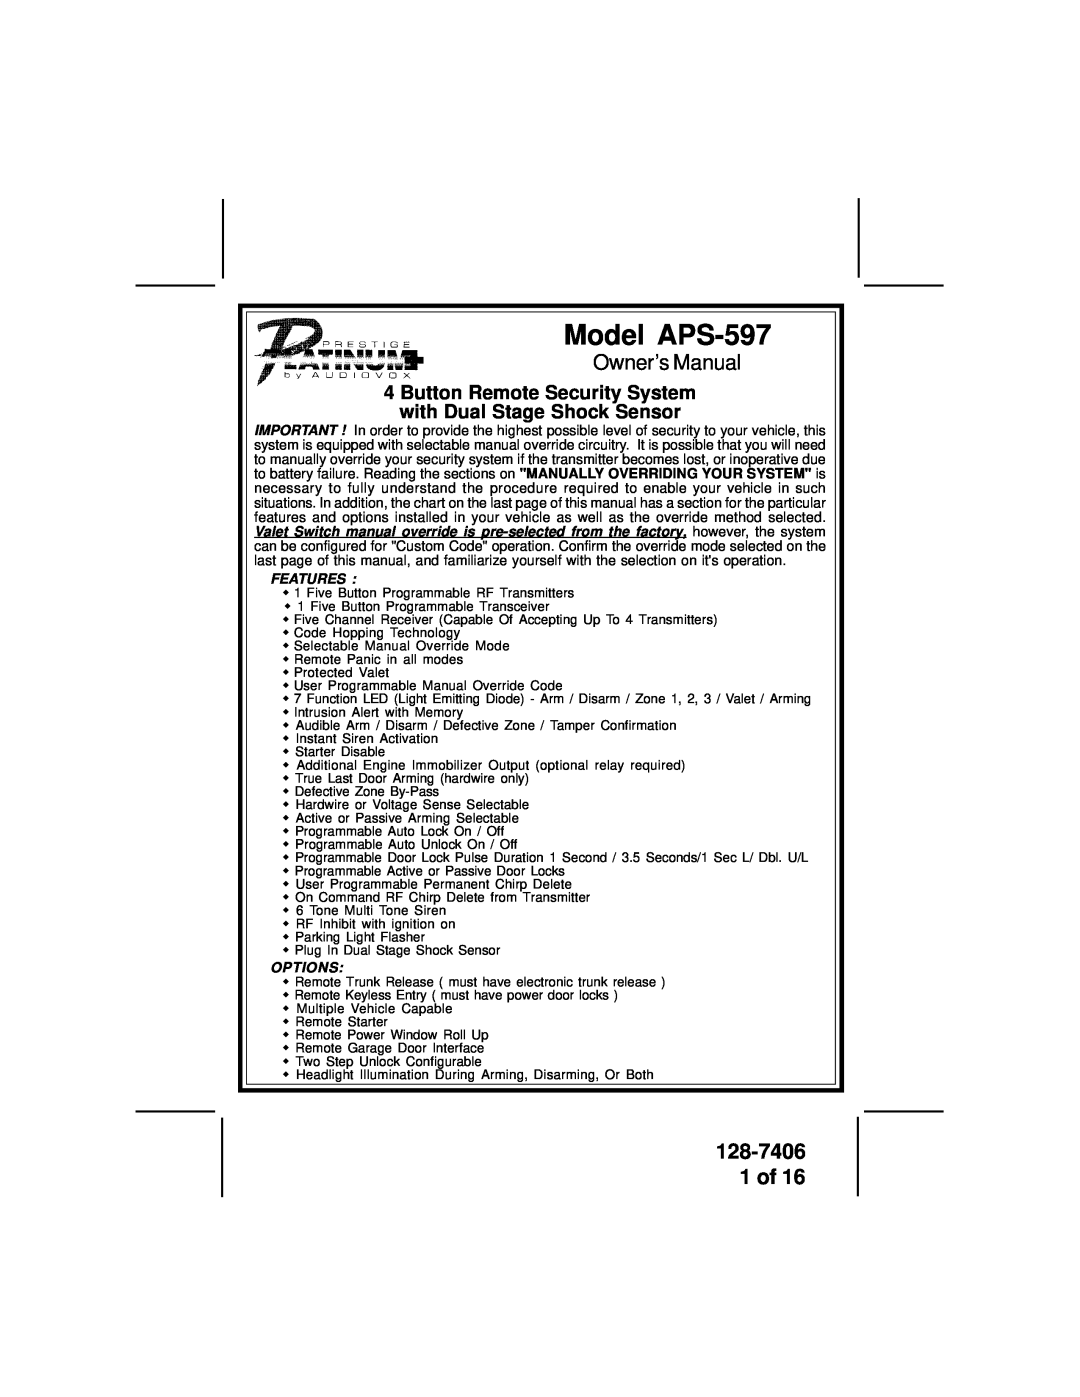 Audiovox AVT597 owner manual 128-7406 1 of, Model APS-597, Features, Options 